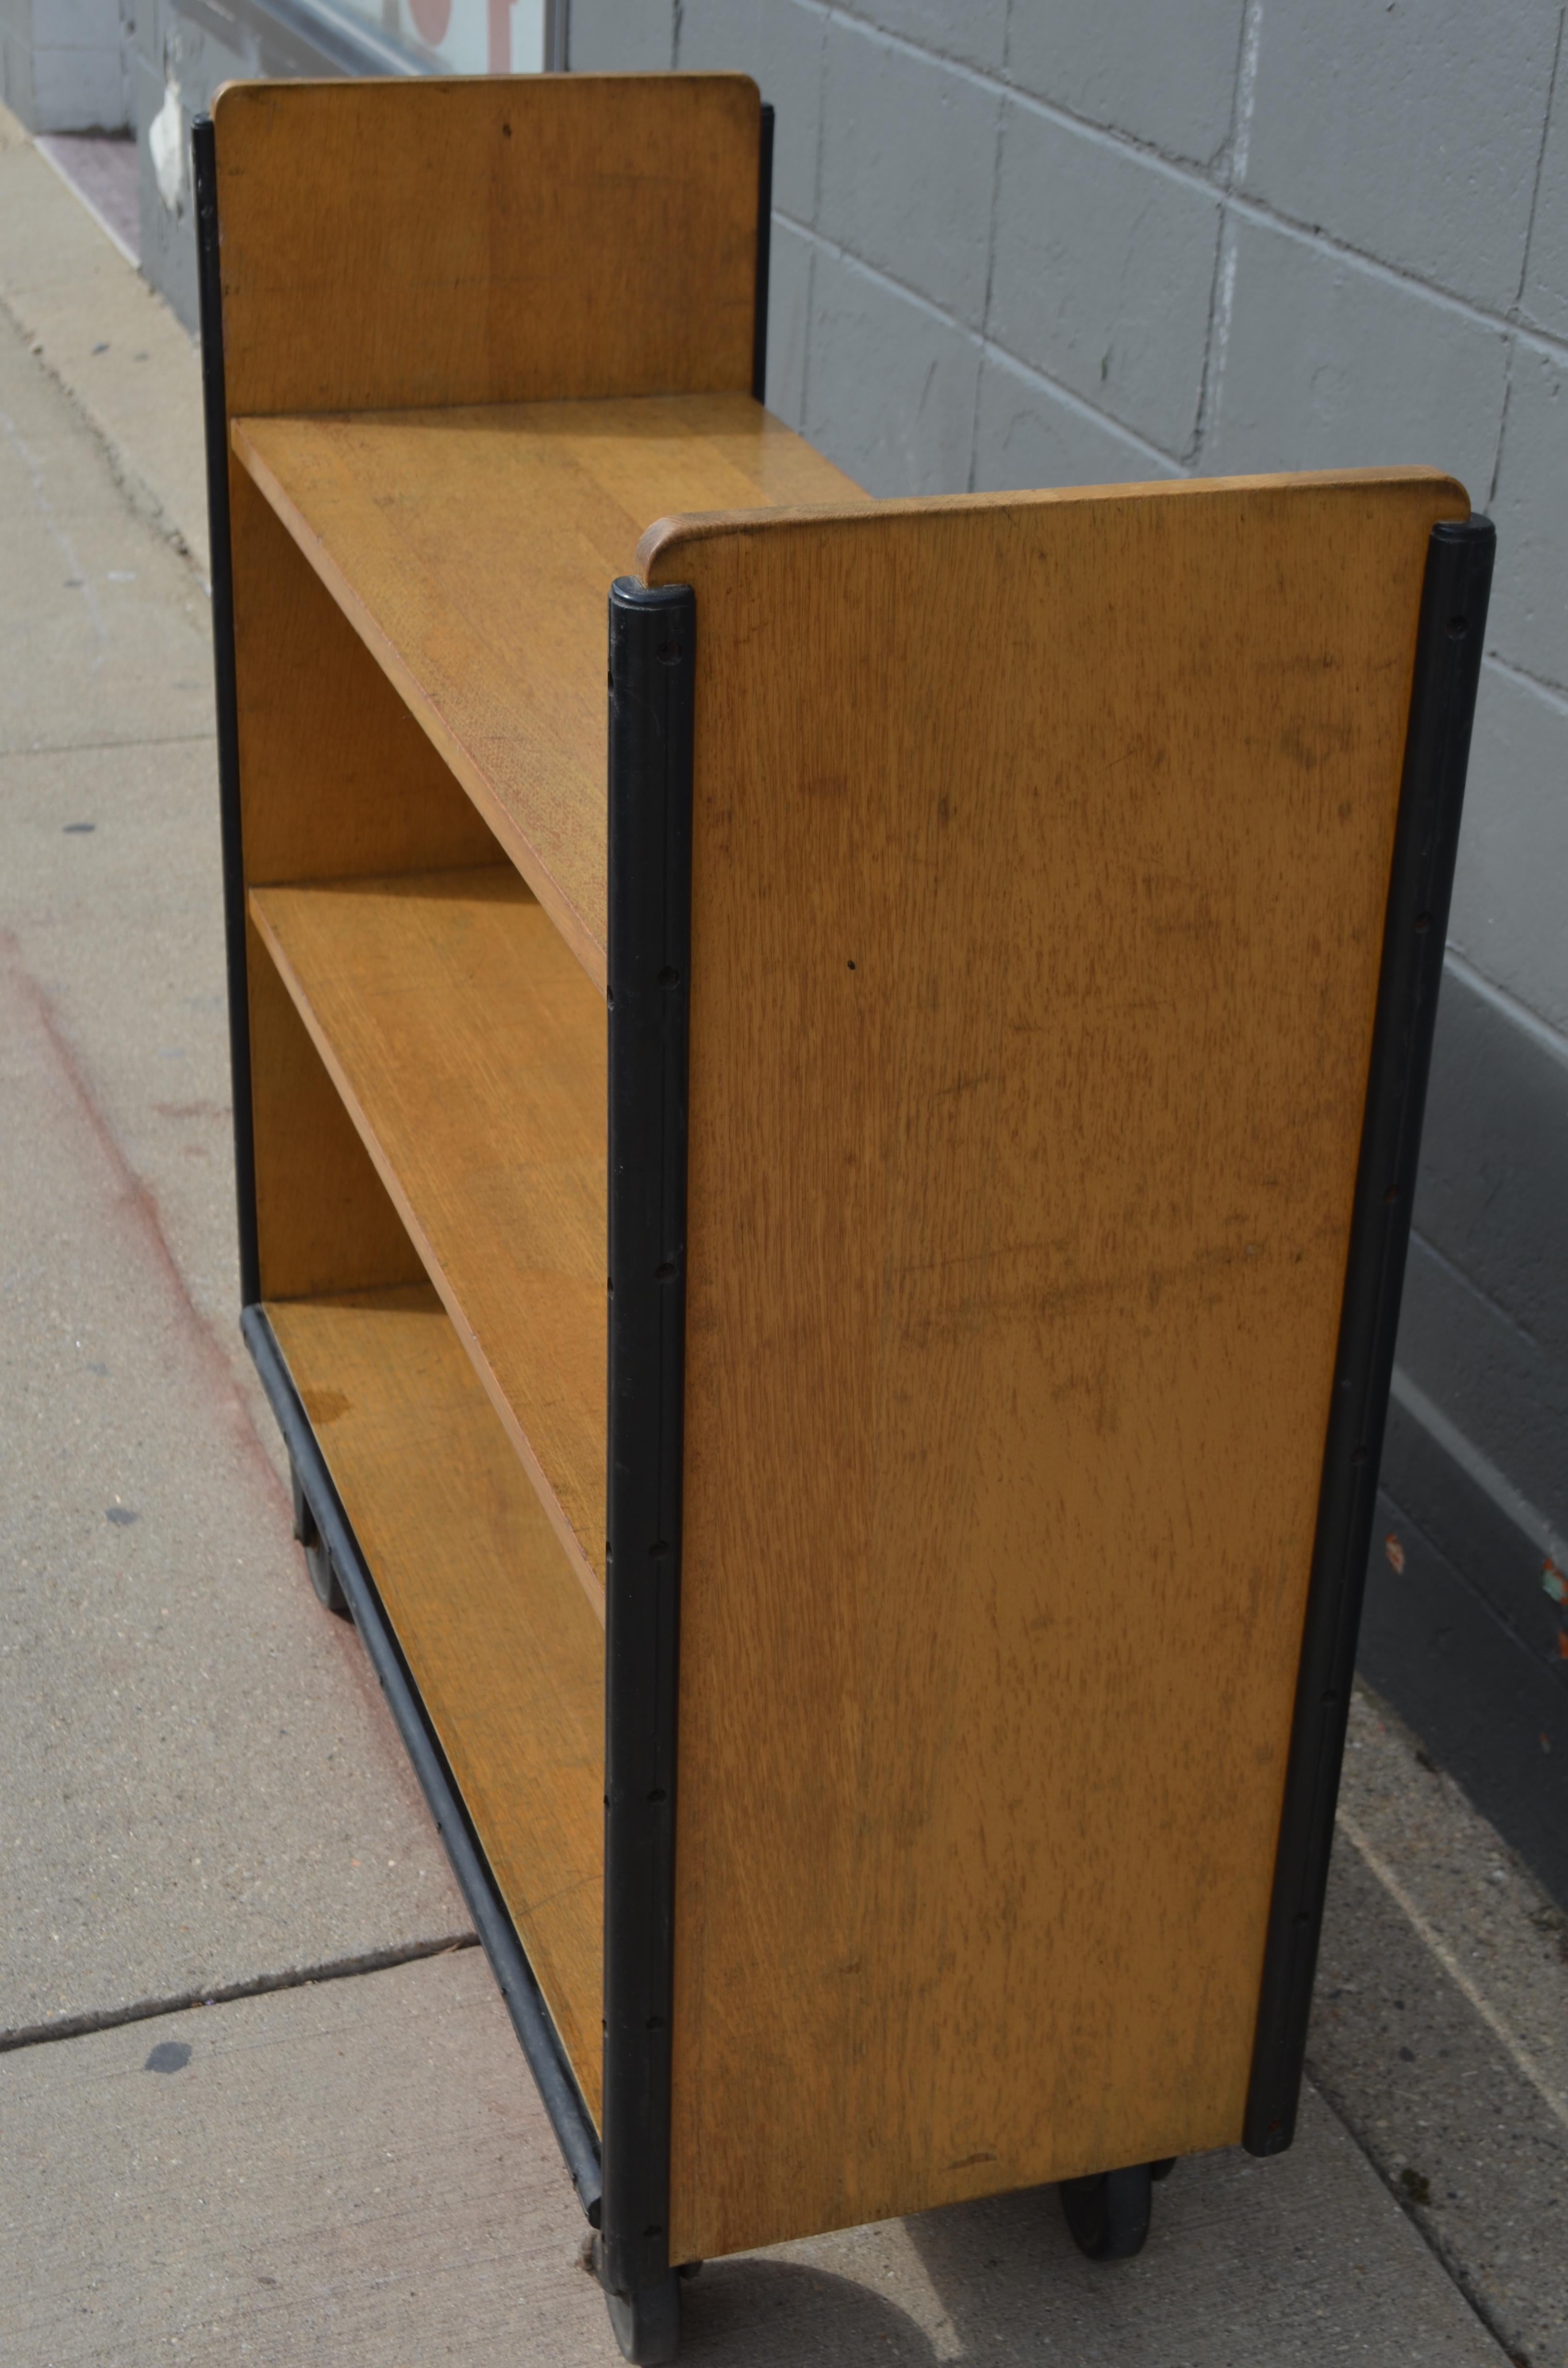 Mid-Century Modern Midcentury Book Shelving Cart of Oak on Wheels from Midwestern Public Library